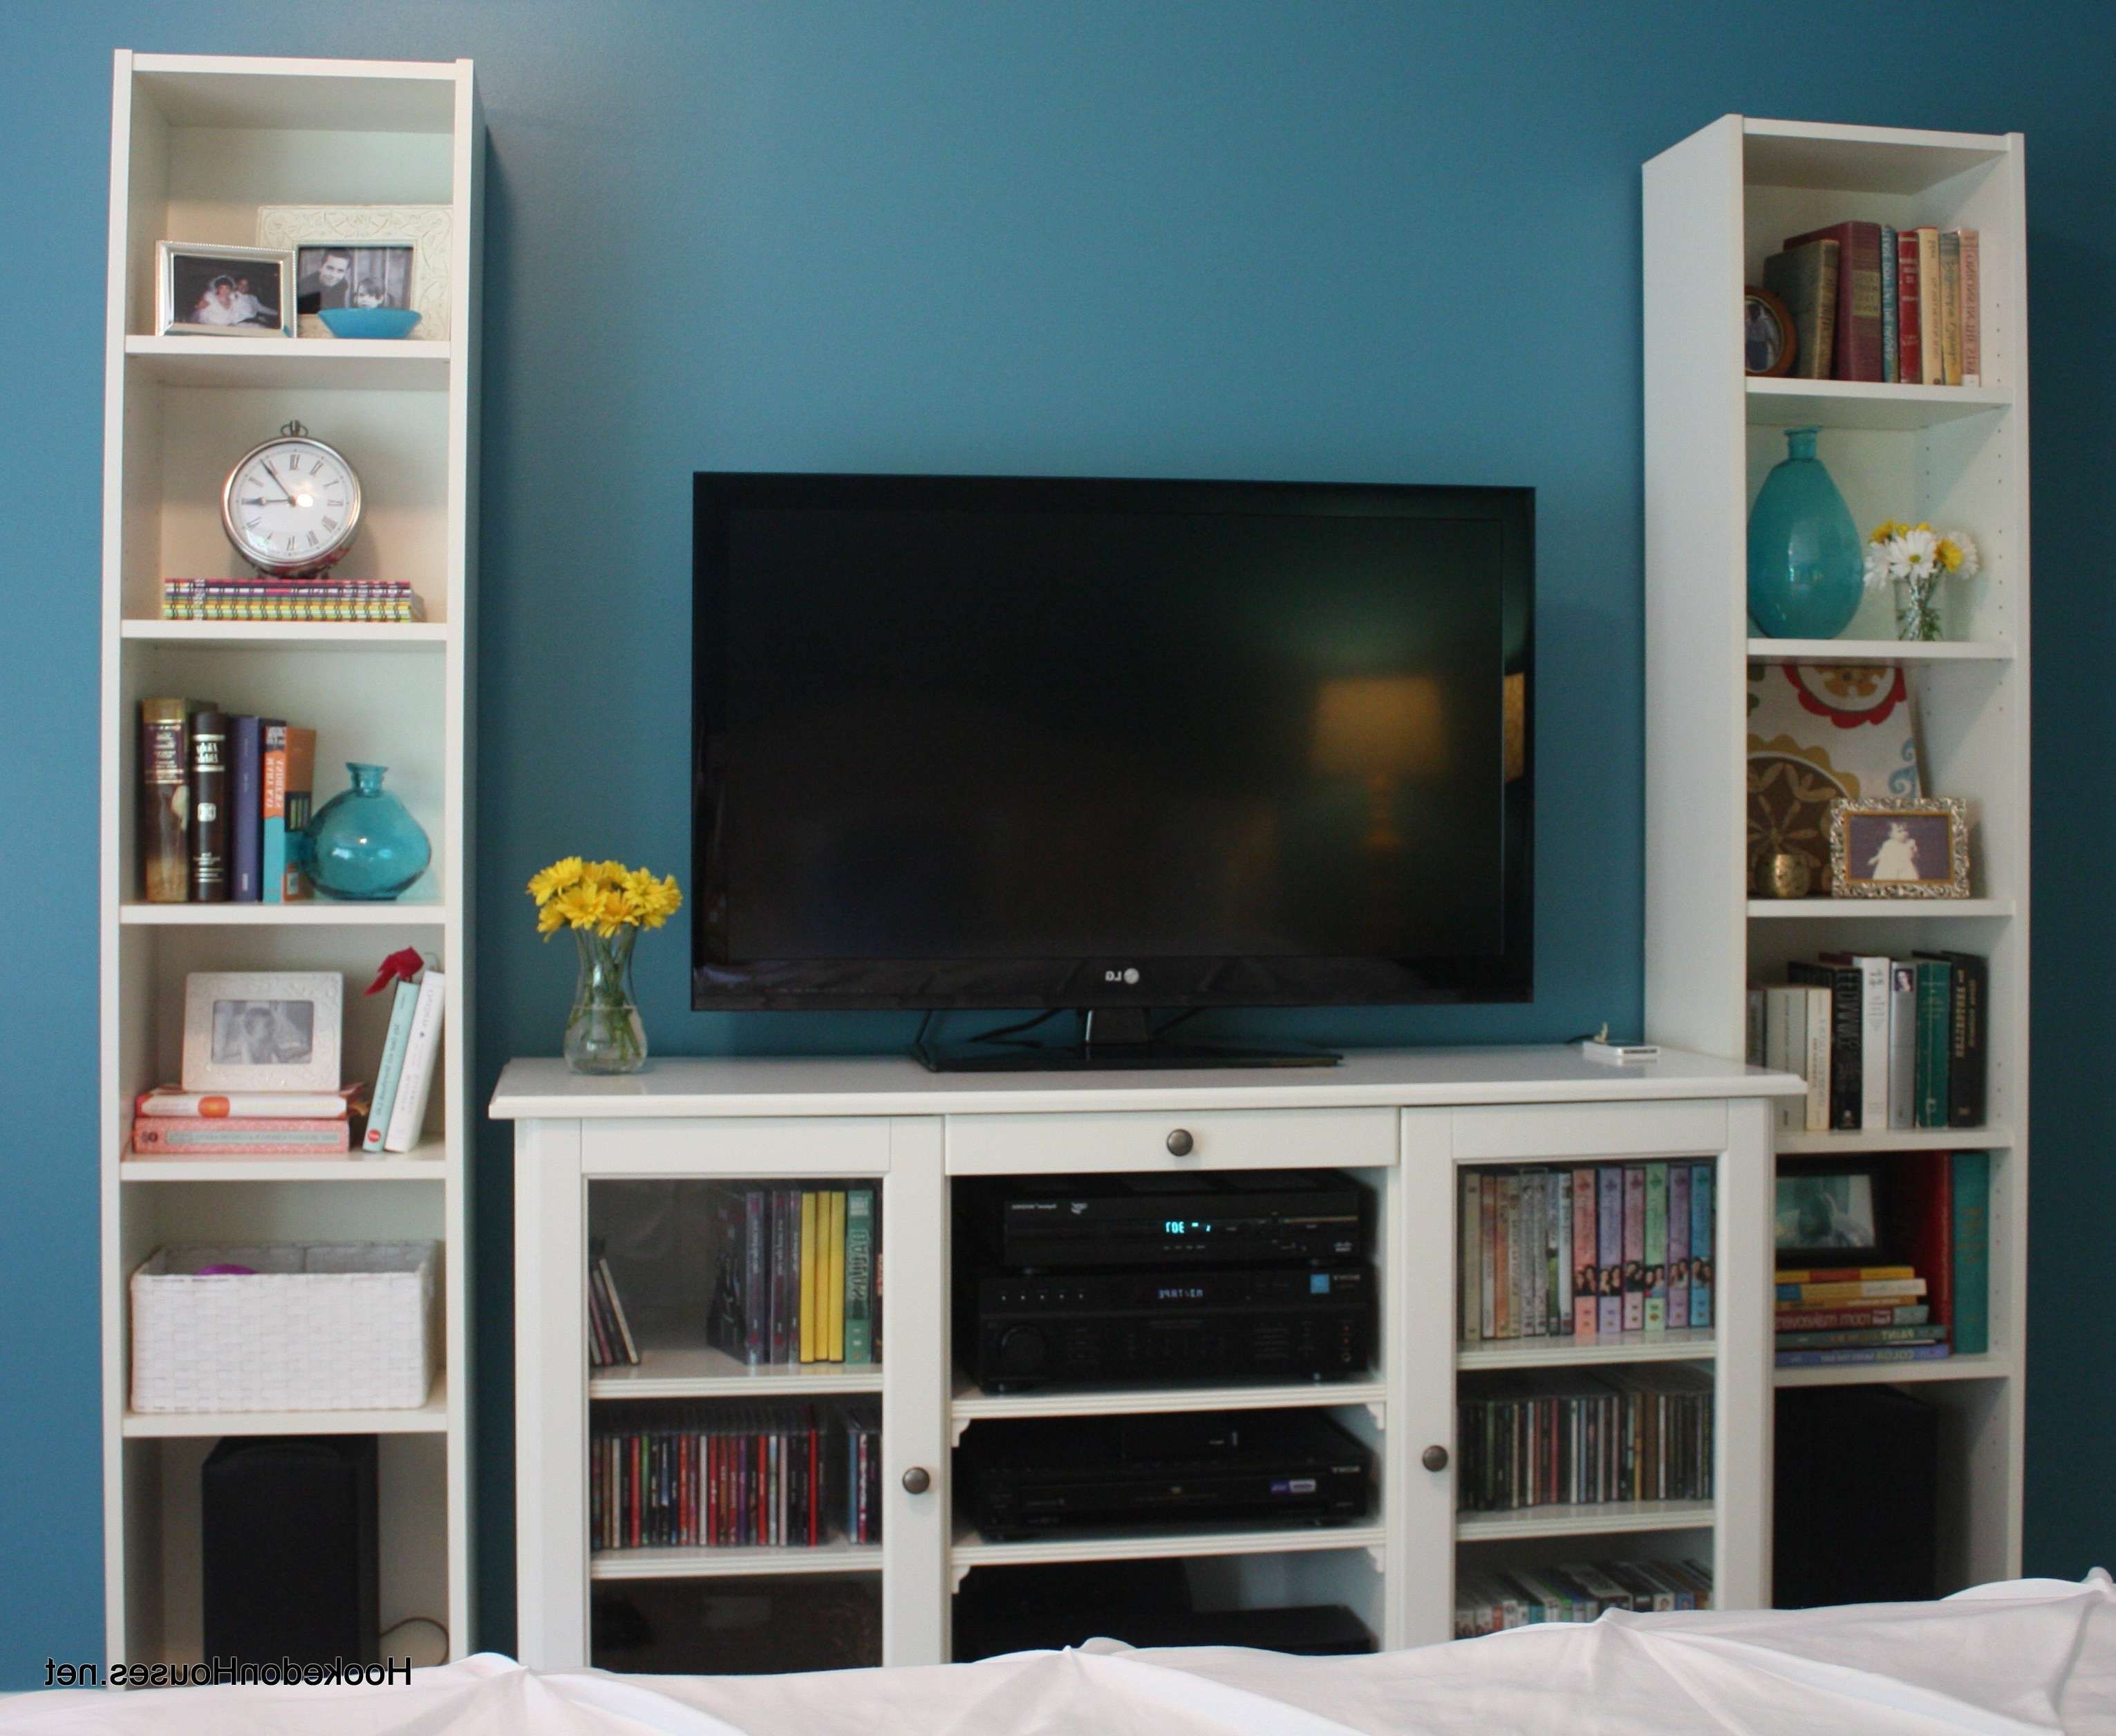 Wall Units. Astonishing Bookcase With Tv Storage: Awesome Bookcase Regarding Bookshelf Tv Stands Combo (Gallery 1 of 15)